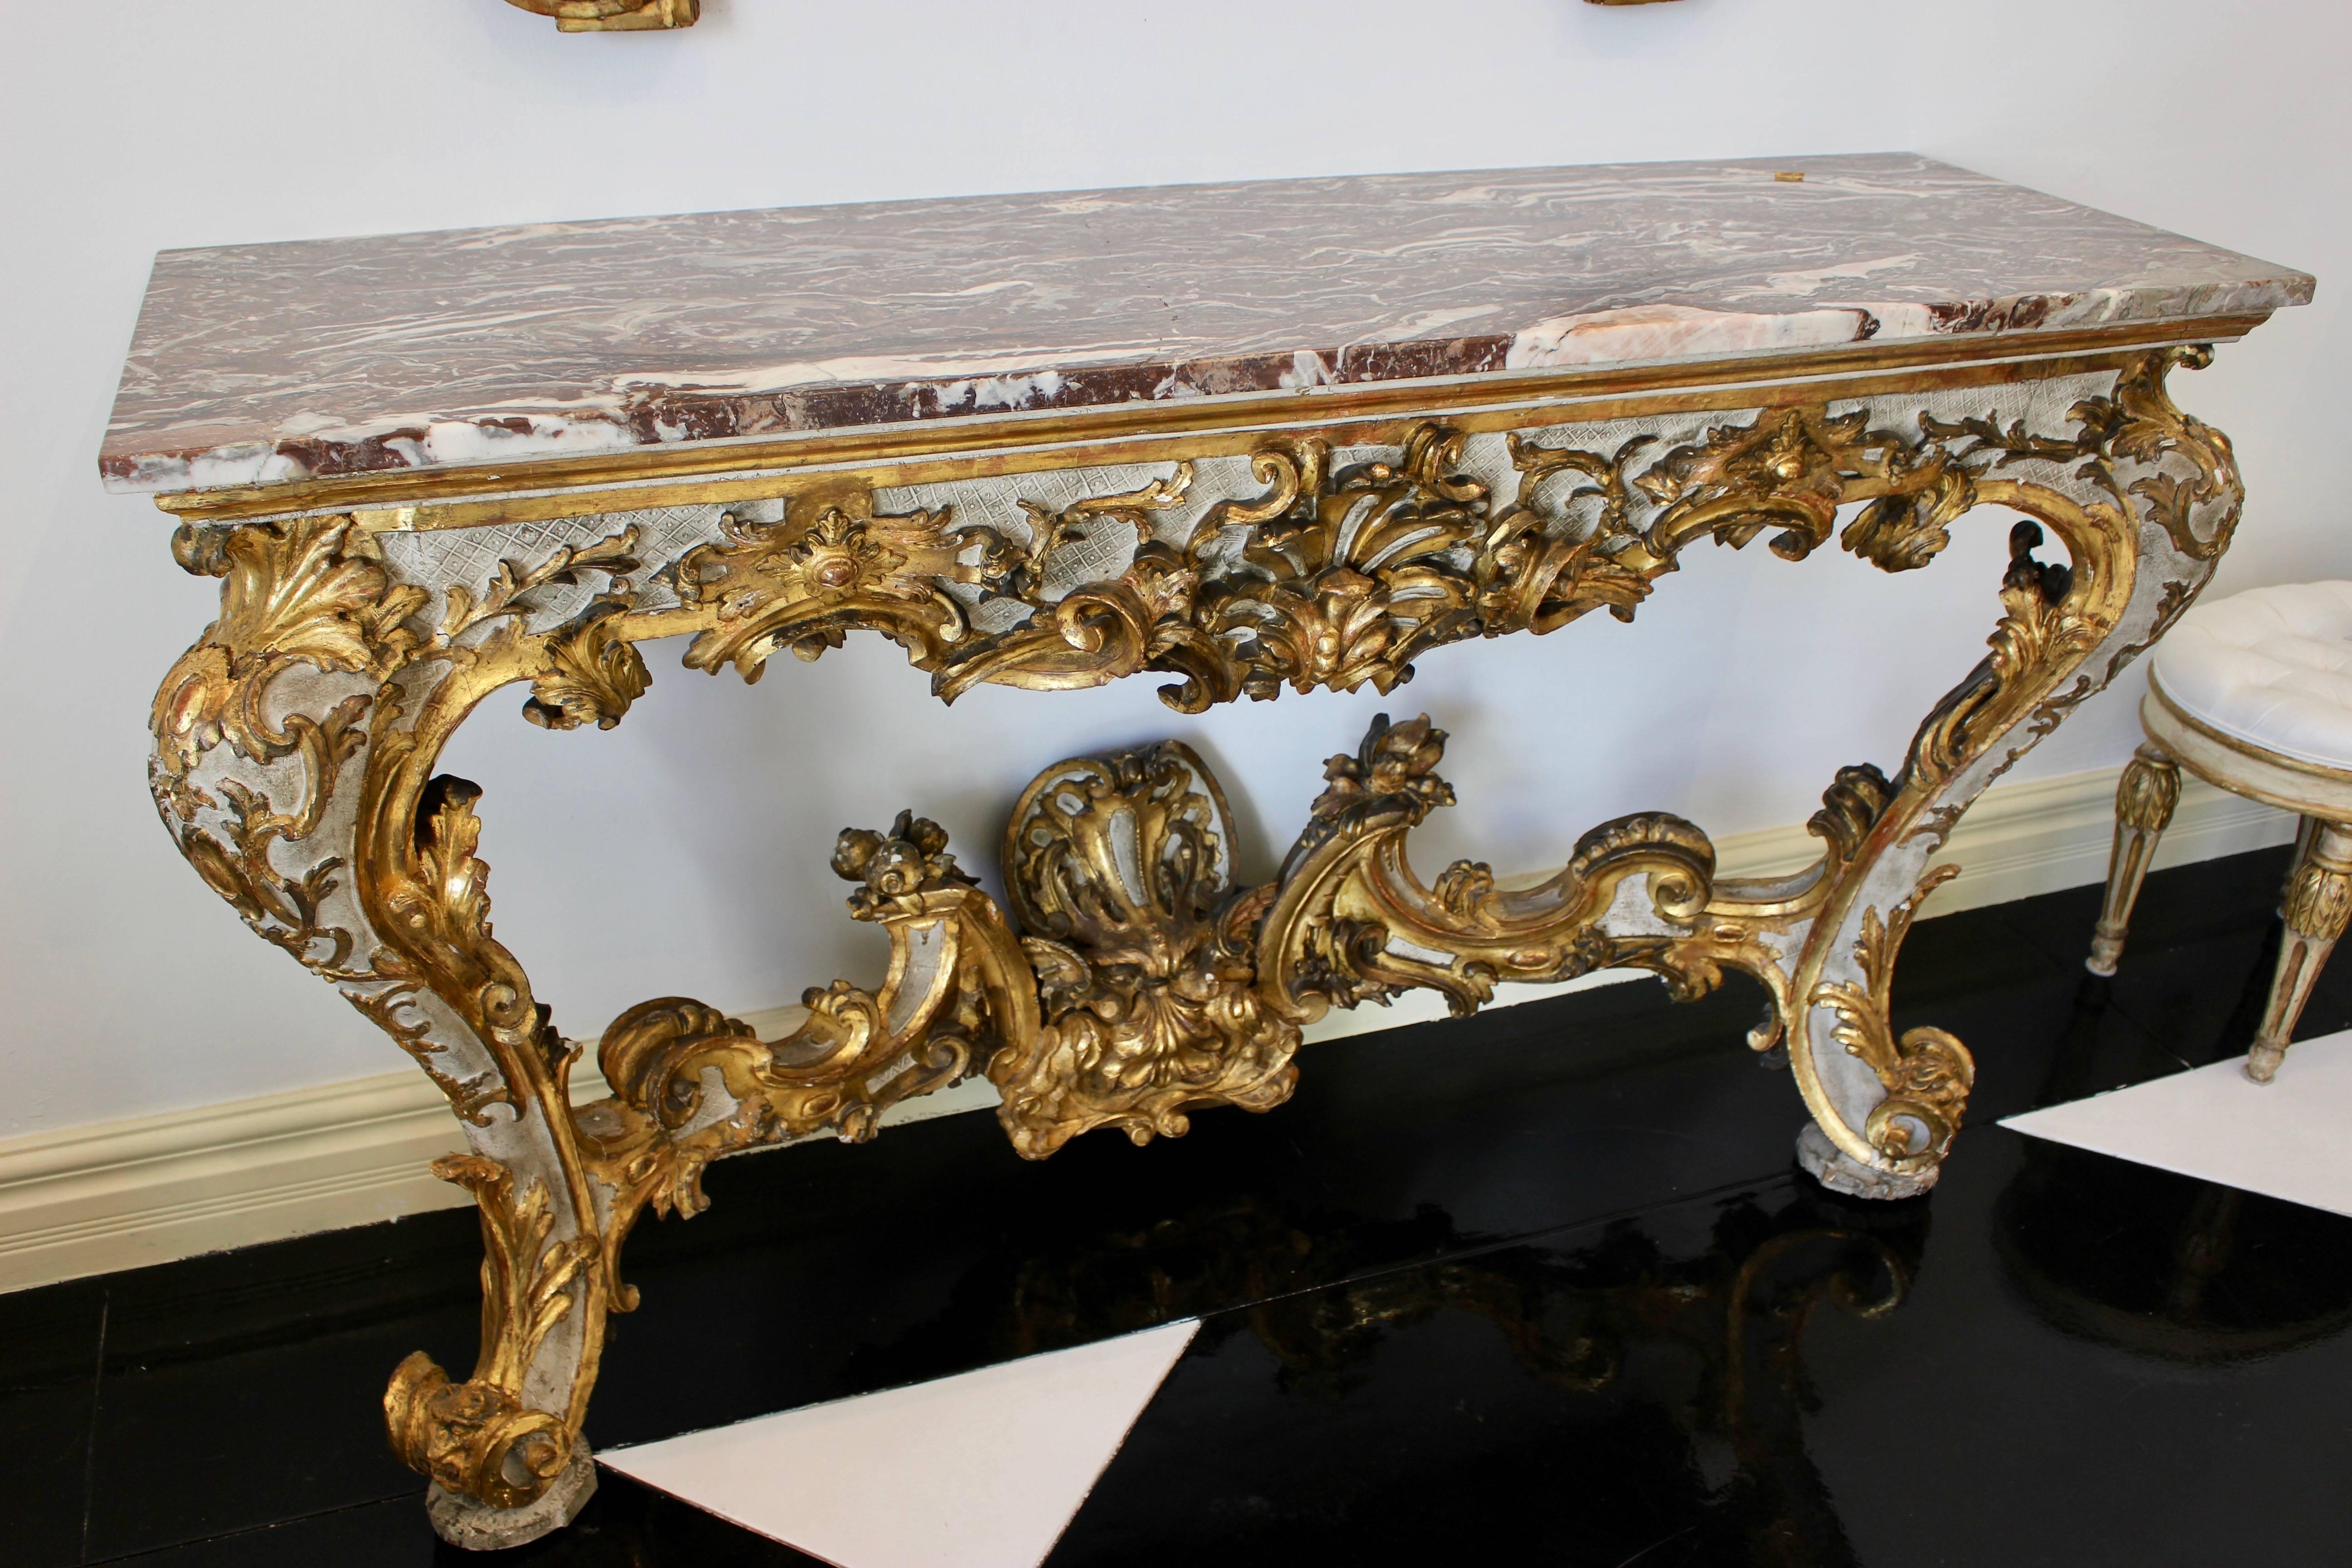 1720s Venetian Early Rococo Period Giltwood Console Table with Red Marble Top For Sale 2